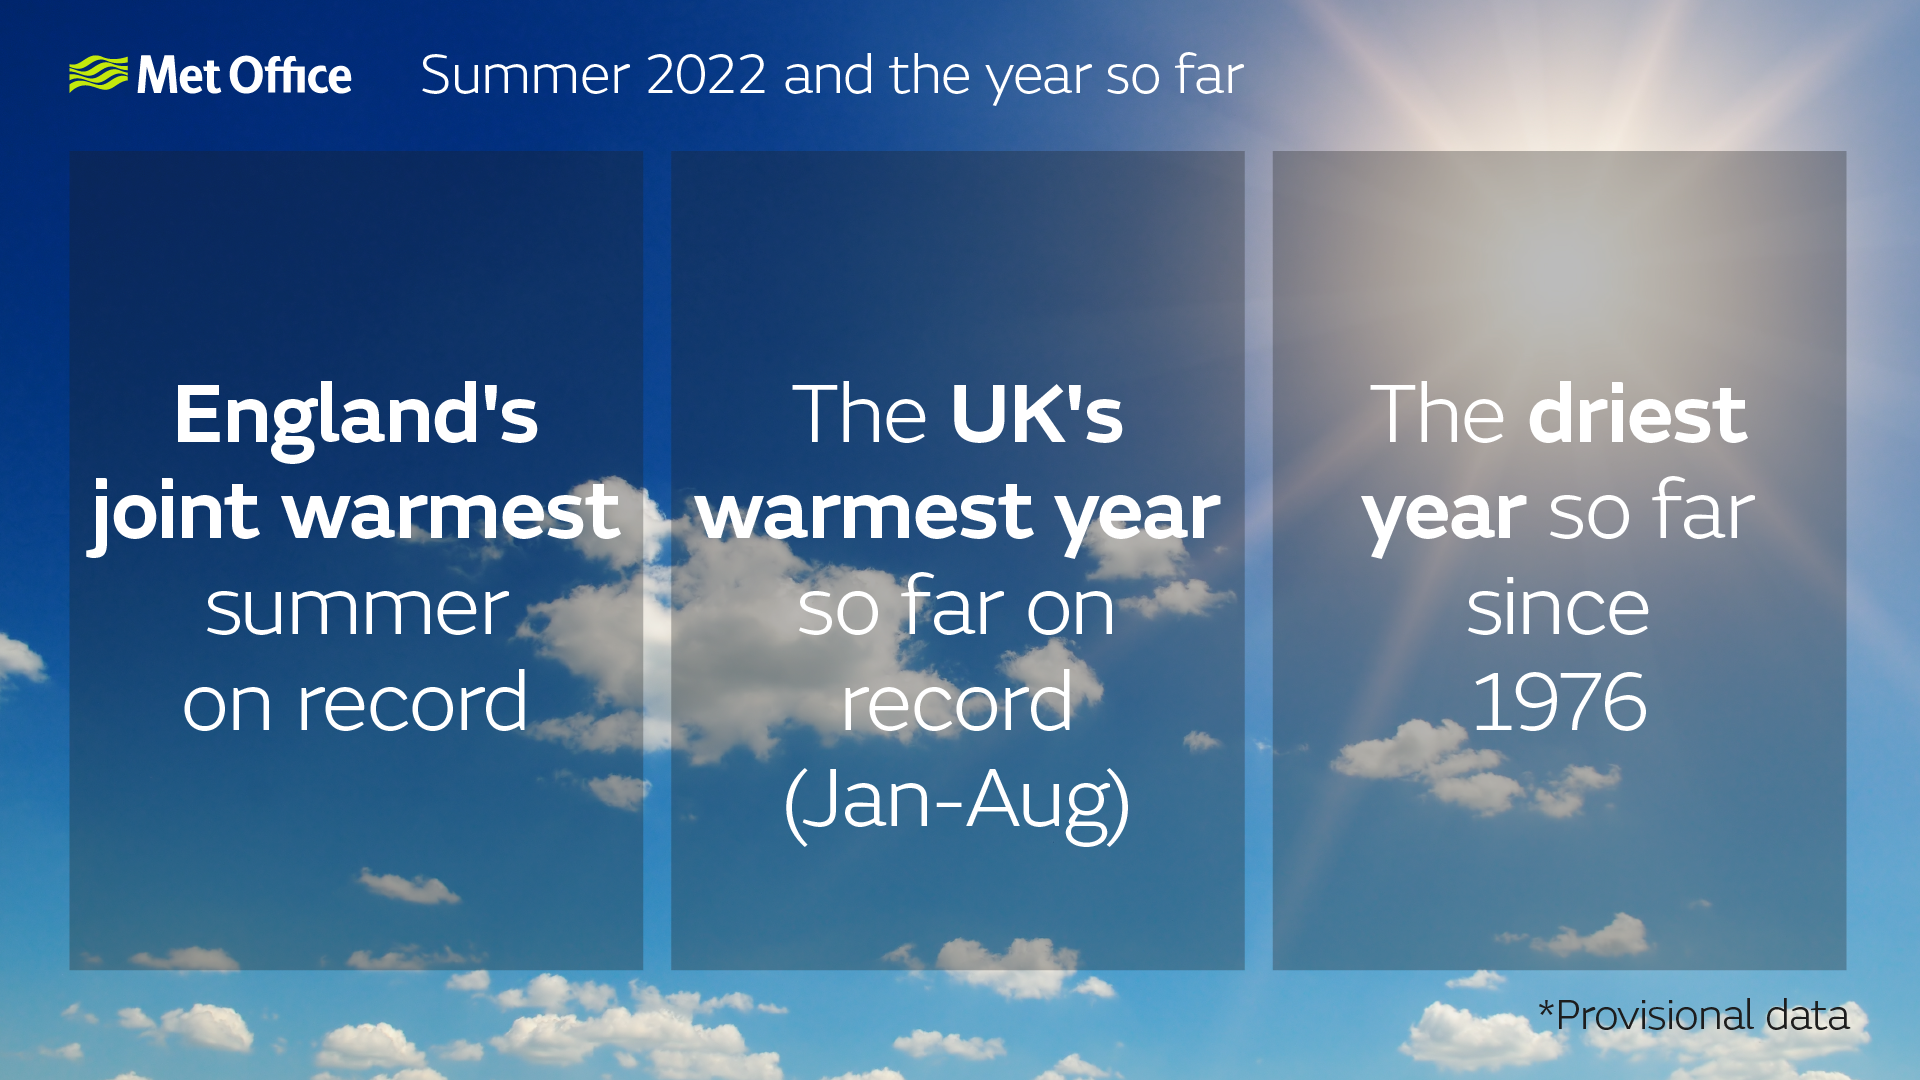 England's joint warmest summer on record, UKs warmest year so far, UK's driest years so far since 1976